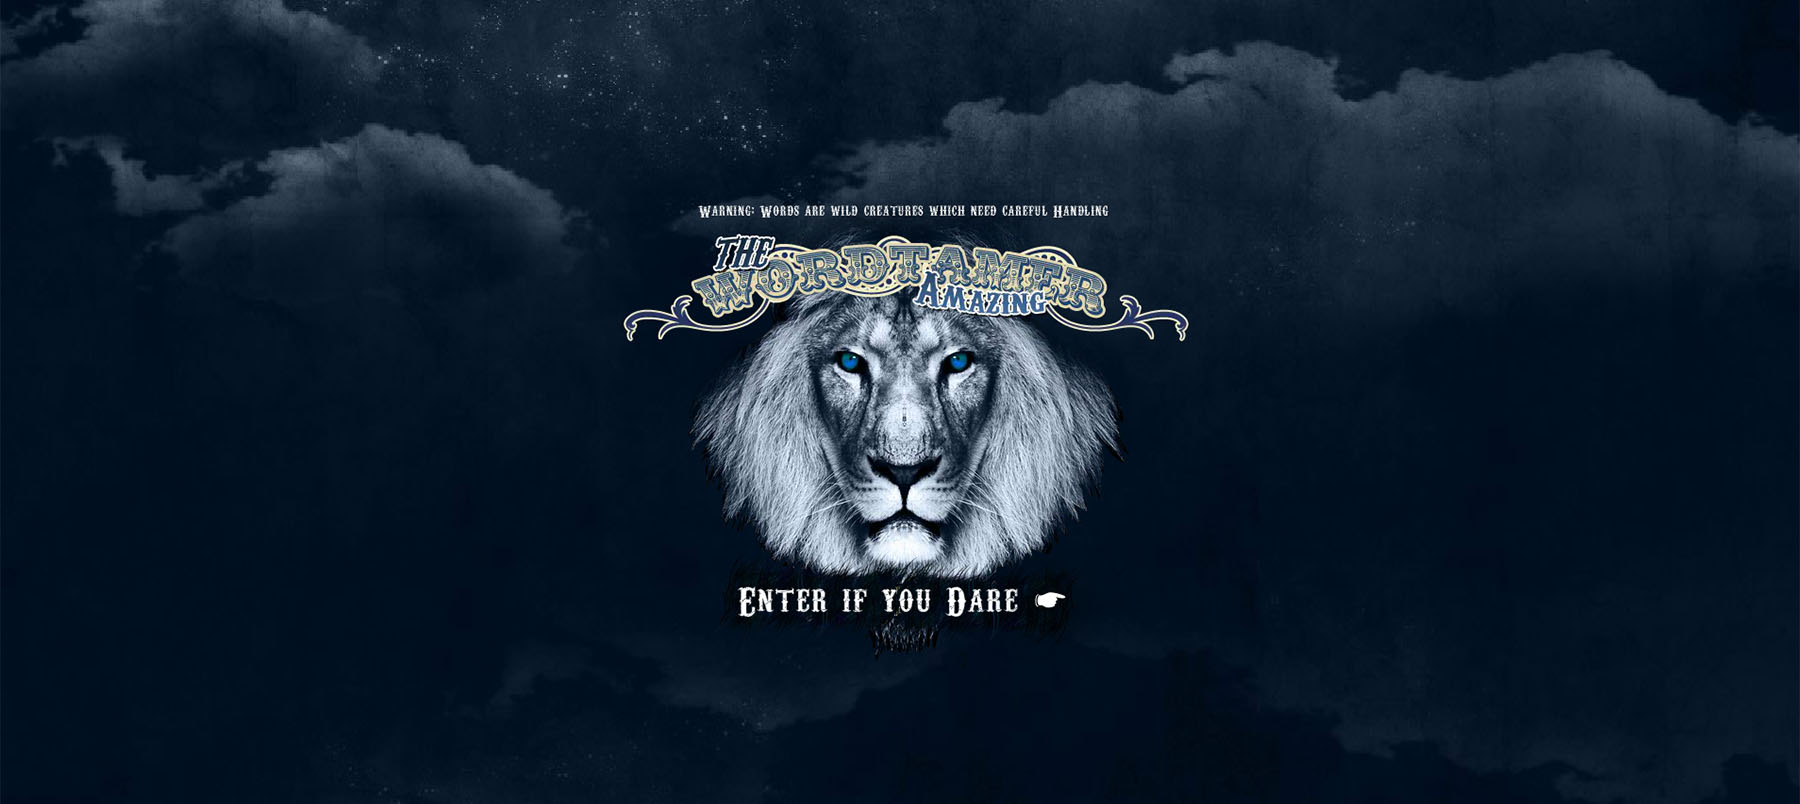 'The Amazing Wordtamer - Enter if you dare' picture of black and white lion with blue eyes